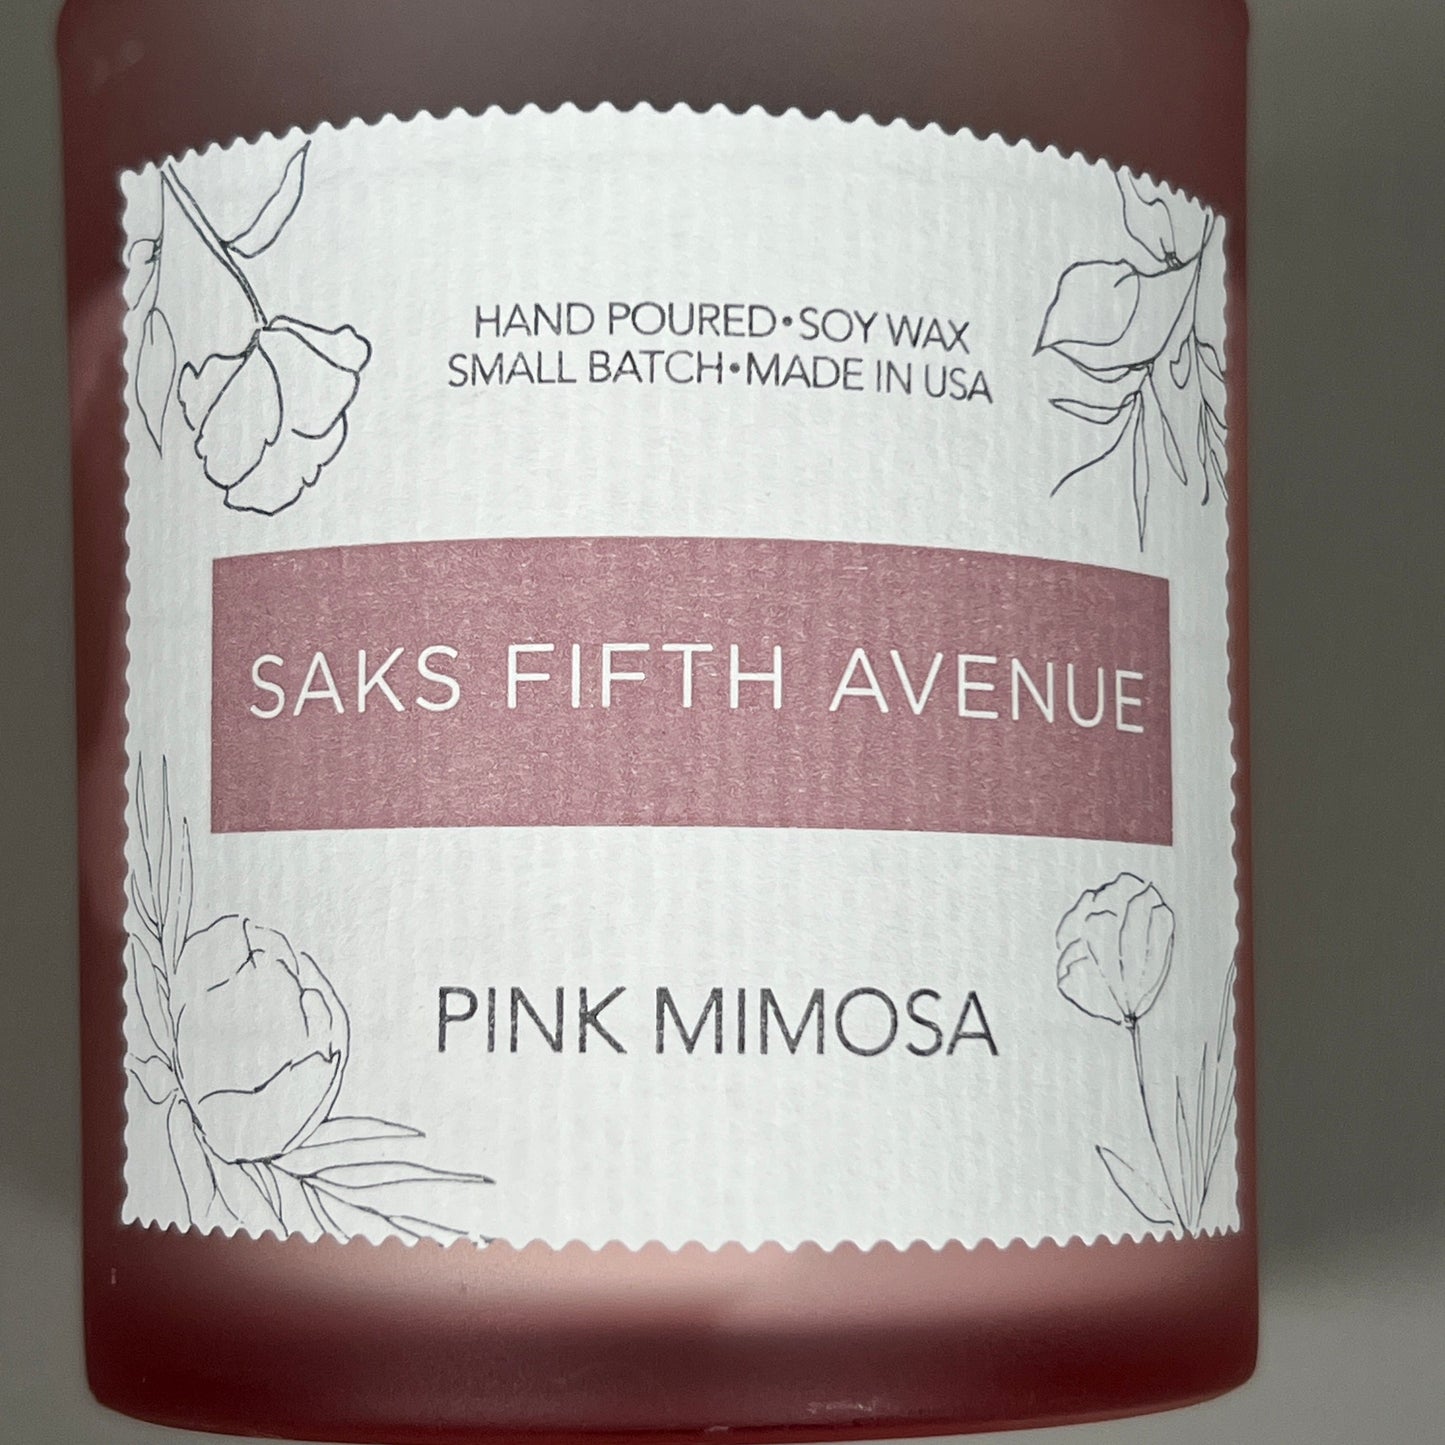 SAKS FIFTH AVENUE Pink Mimosa Hand Poured Soy Wax Candle 8 fl oz LOT OF 4! (New)